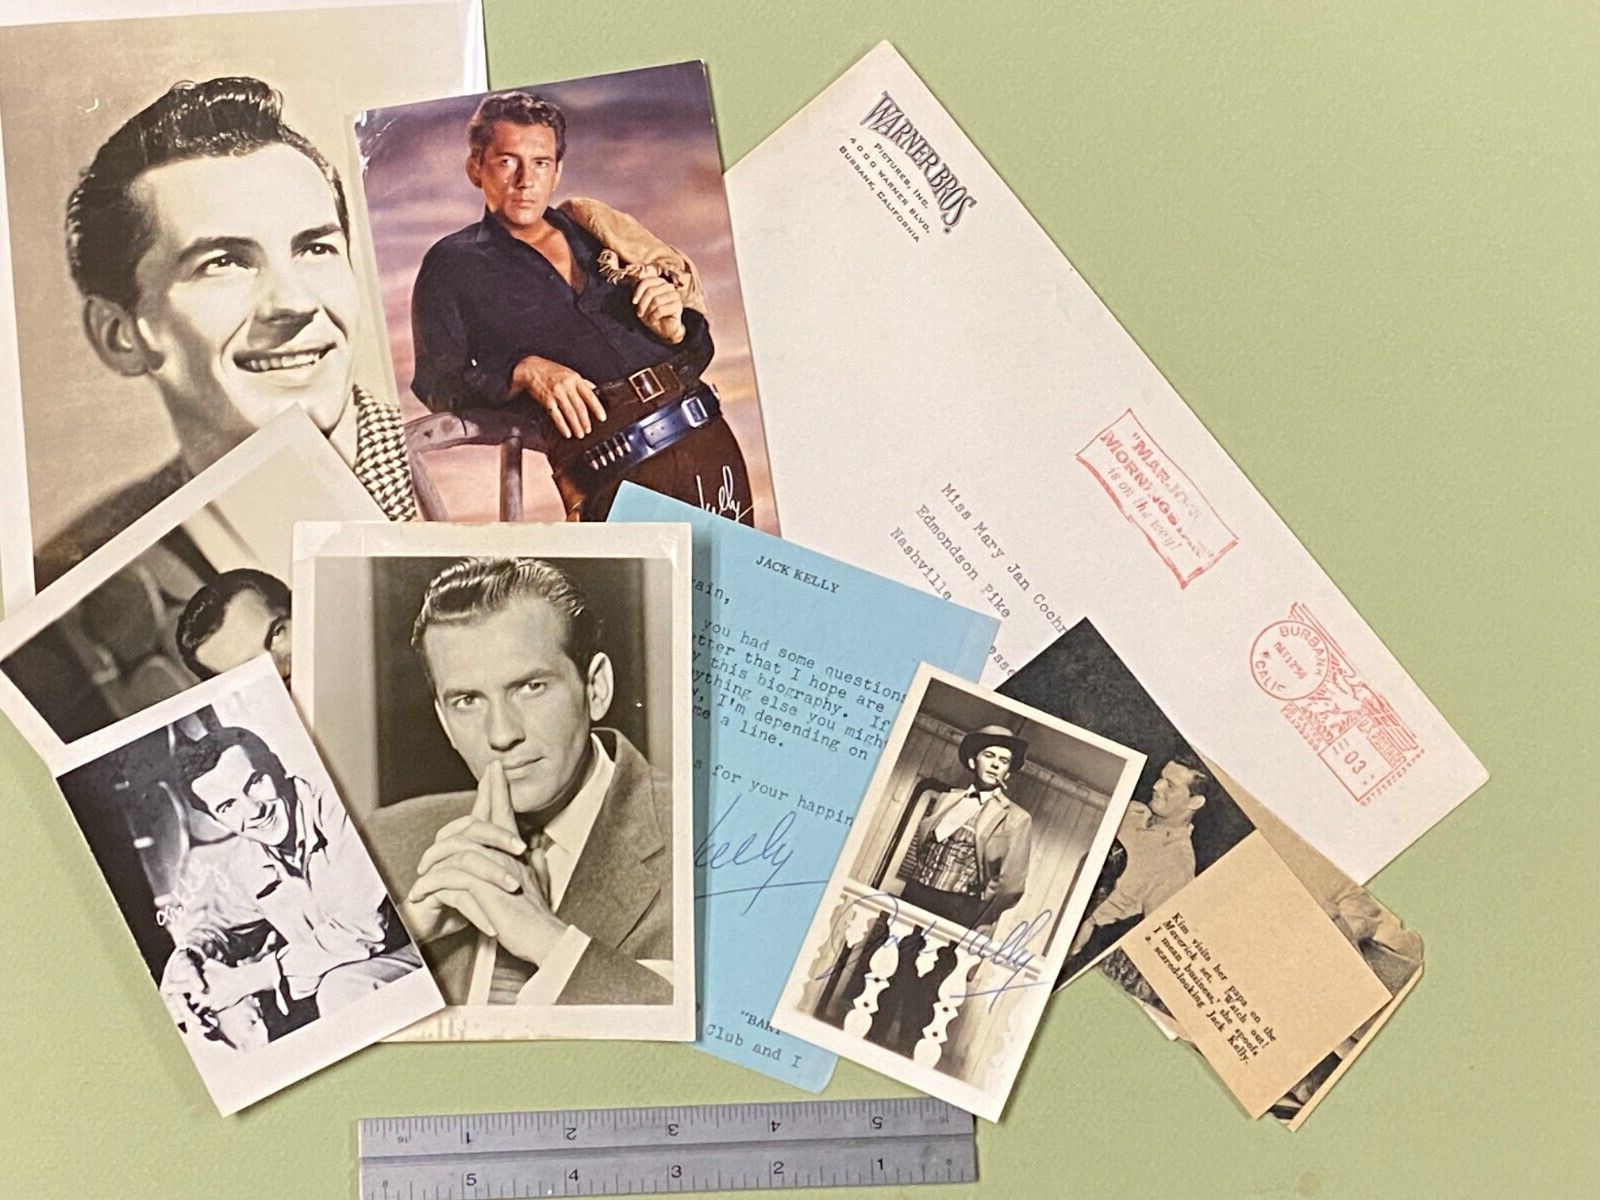 Lot of Vintage Photos and Autograph from Jack Kelly, Actor and Game Show Host